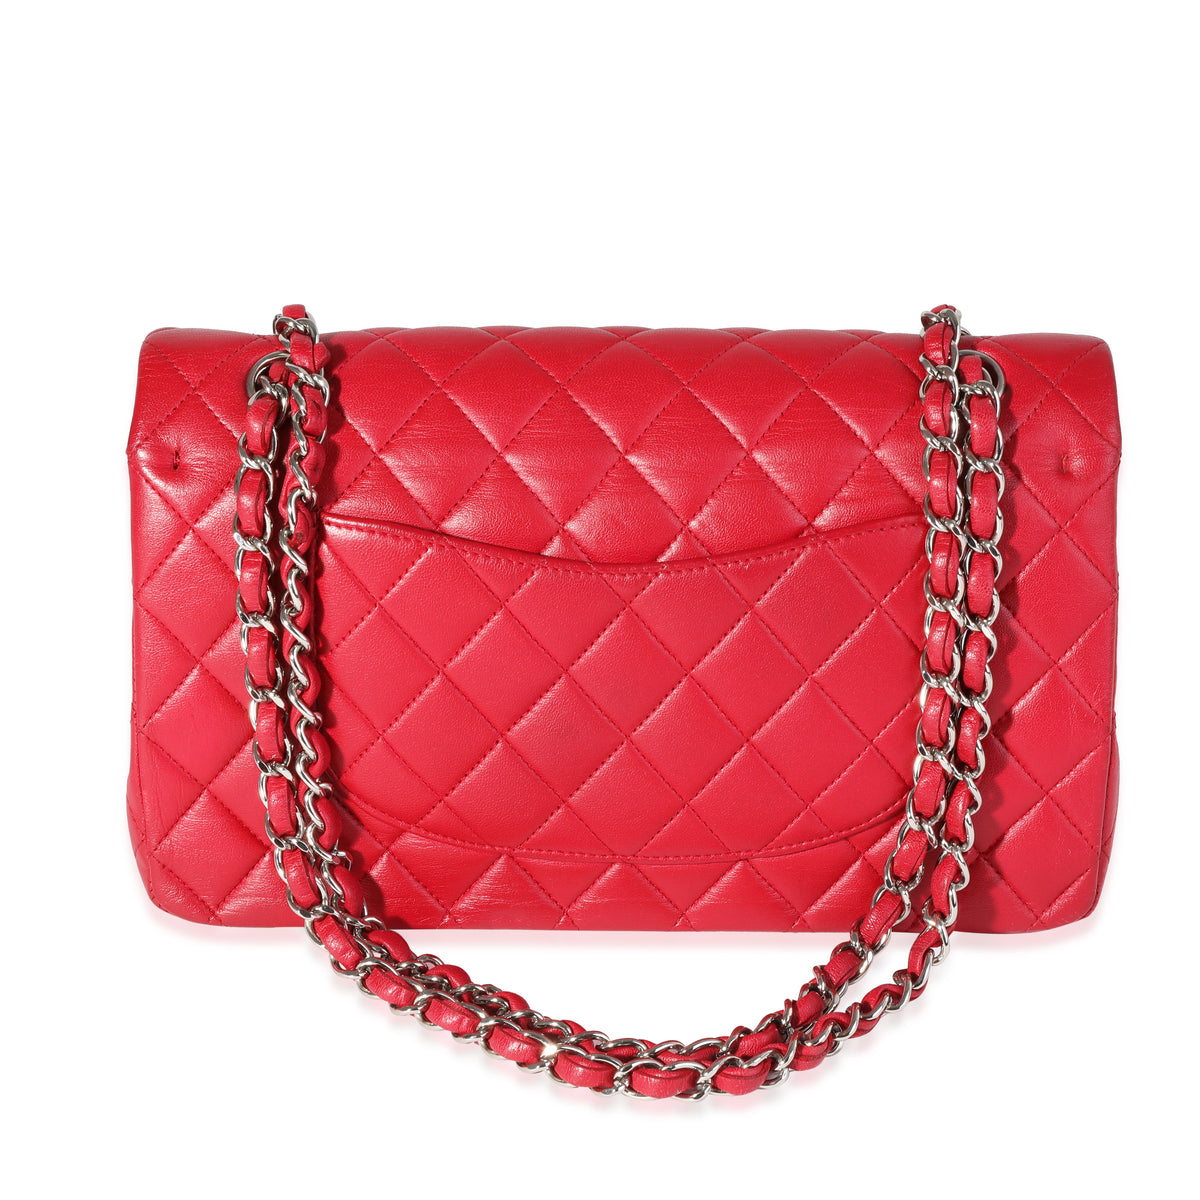 Chanel Red Quilted Lambskin Medium Classic Double Flap Bag, myGemma